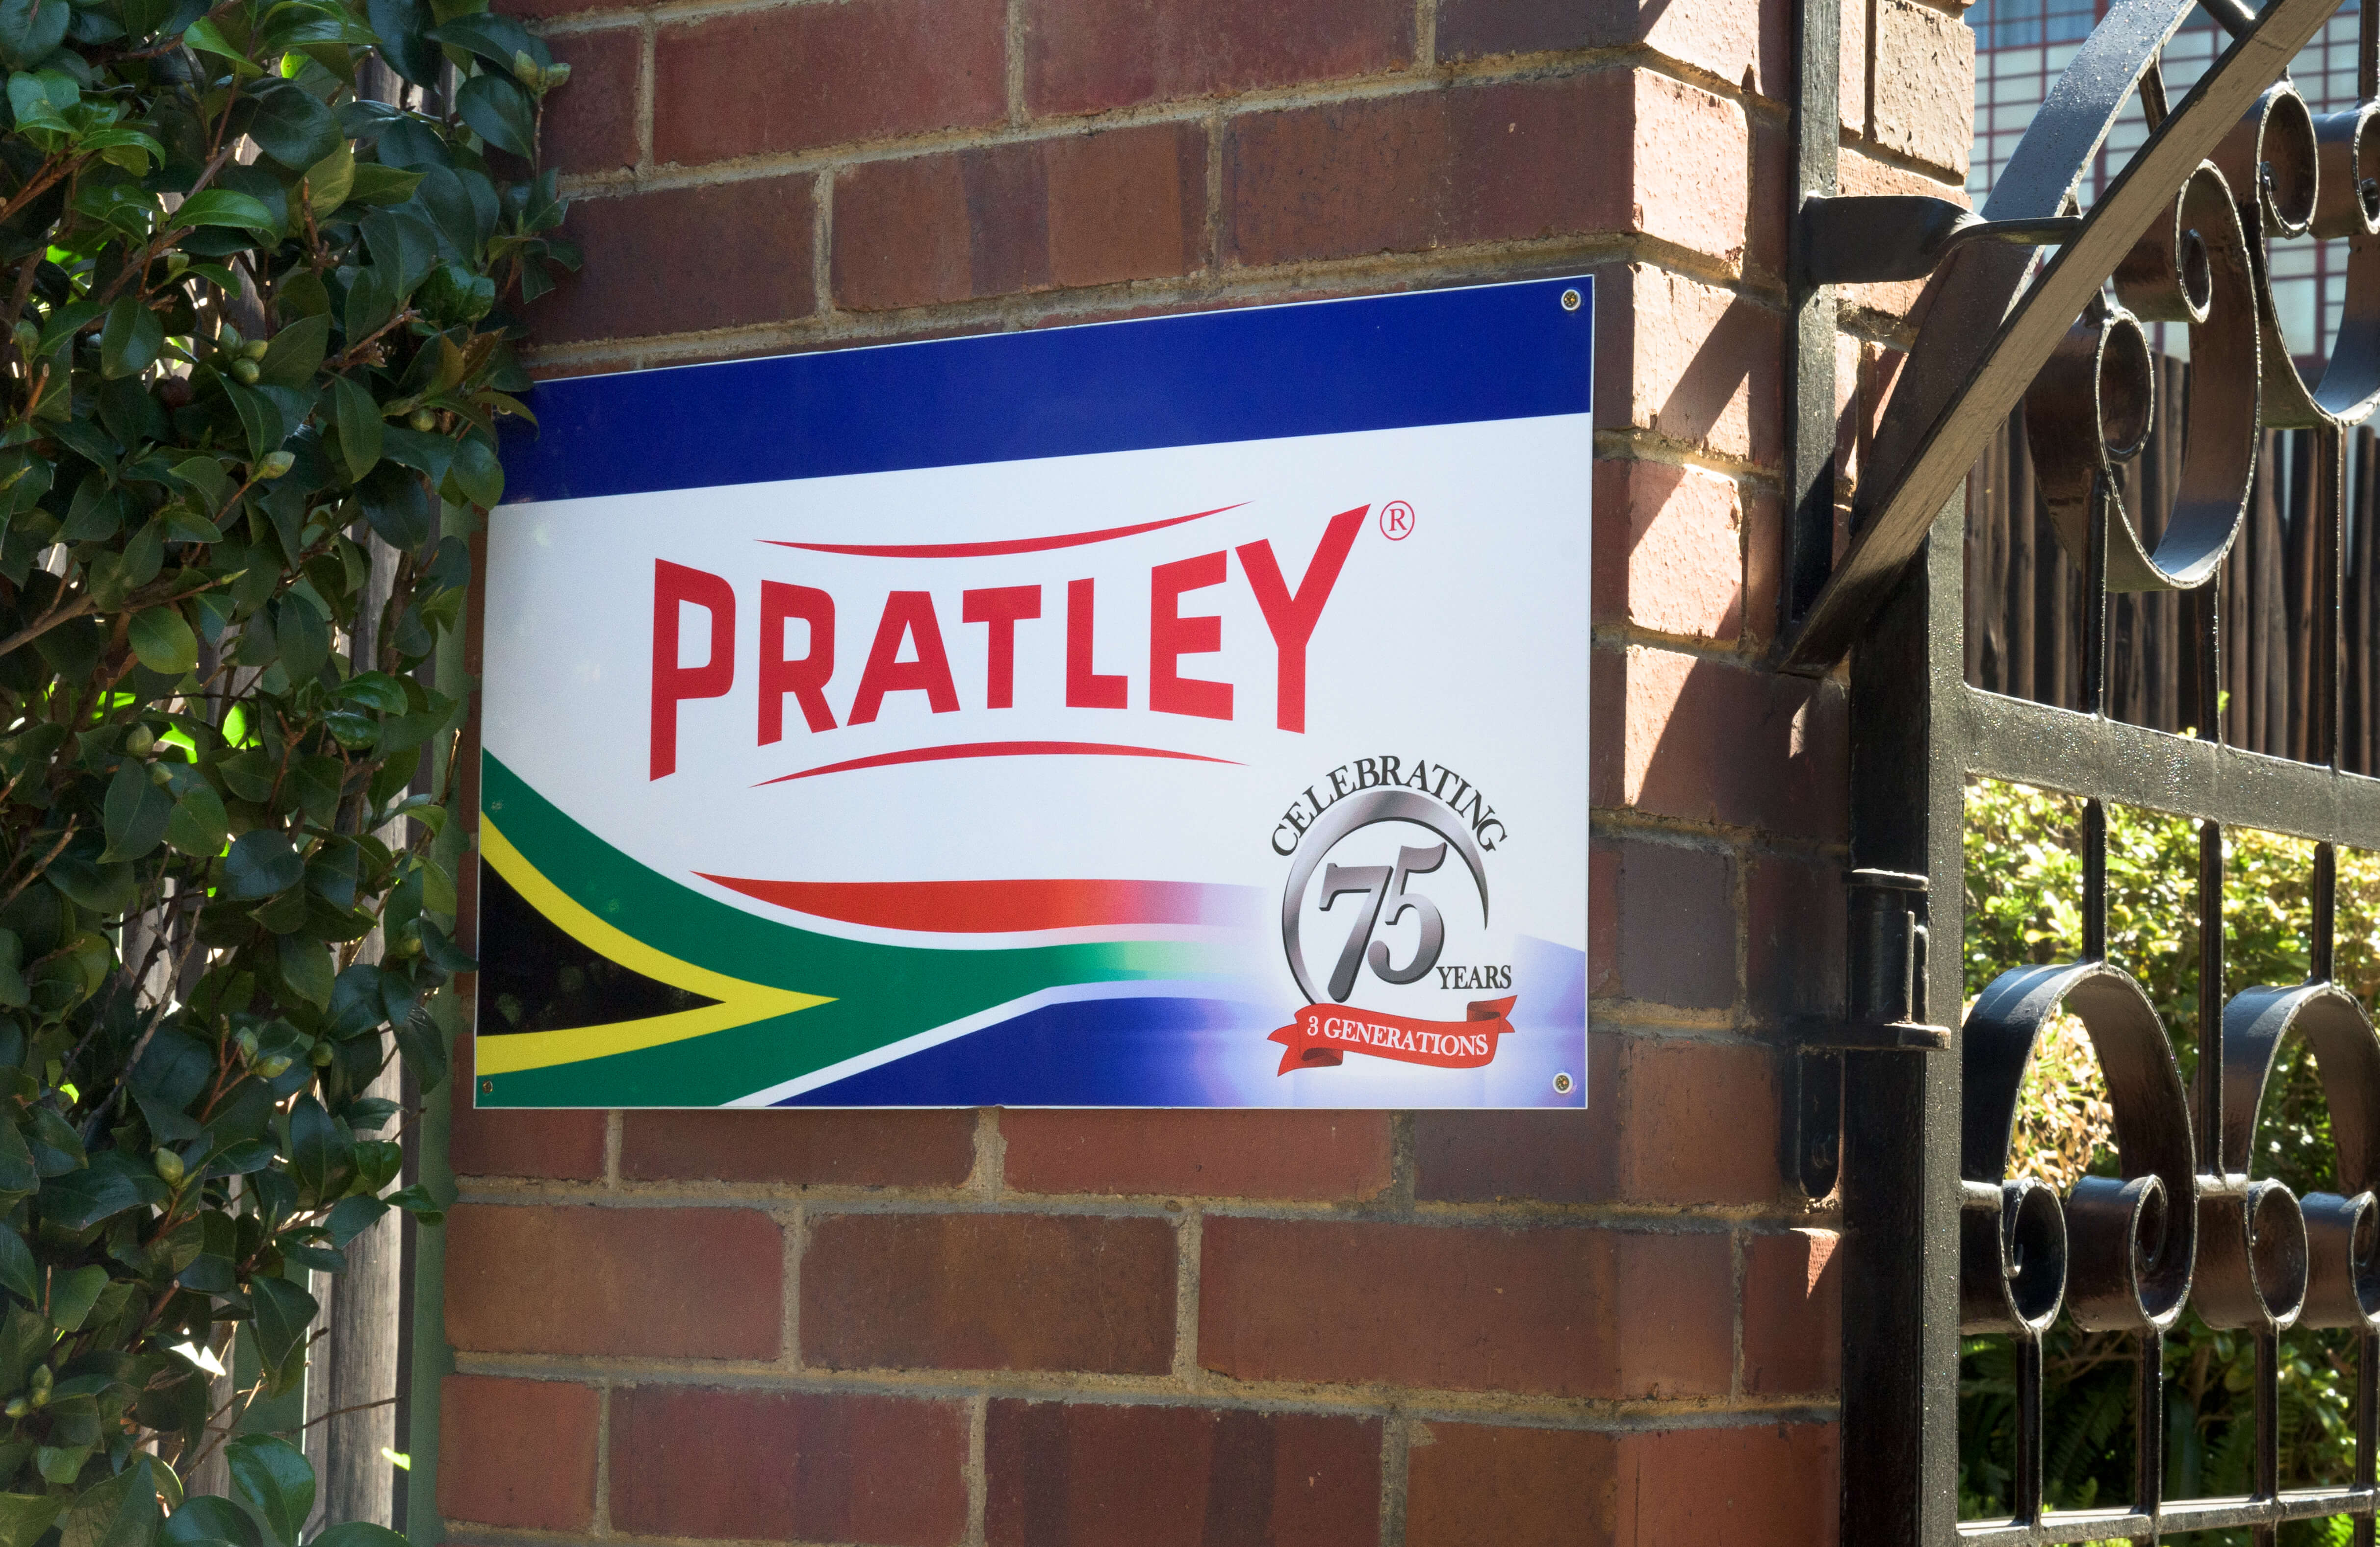 Post_Pratley celebrates 75 years of unique products and ongoing innovation